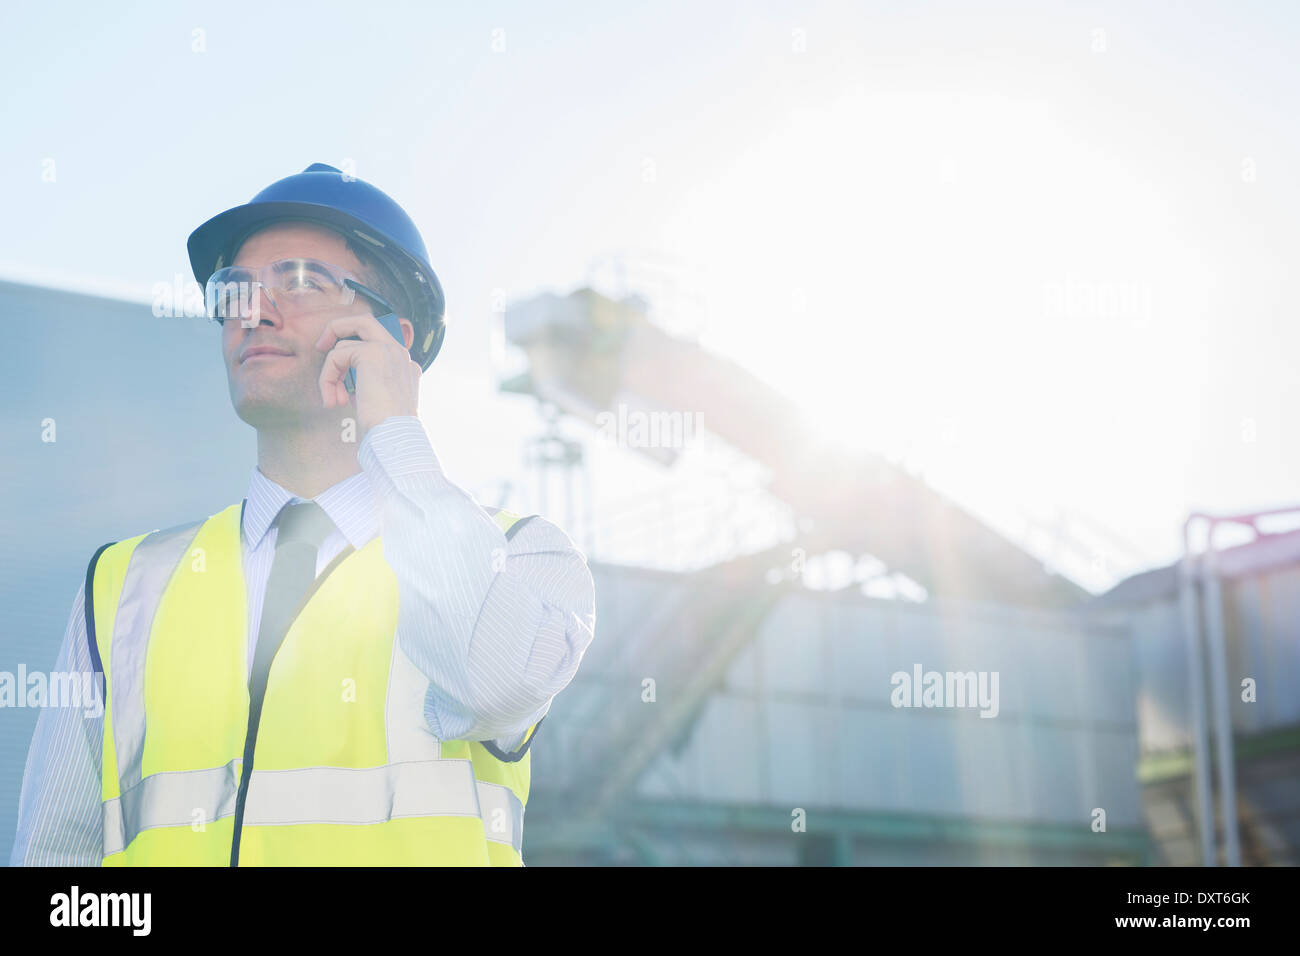 Worker talking on cell phone at granary Stock Photo